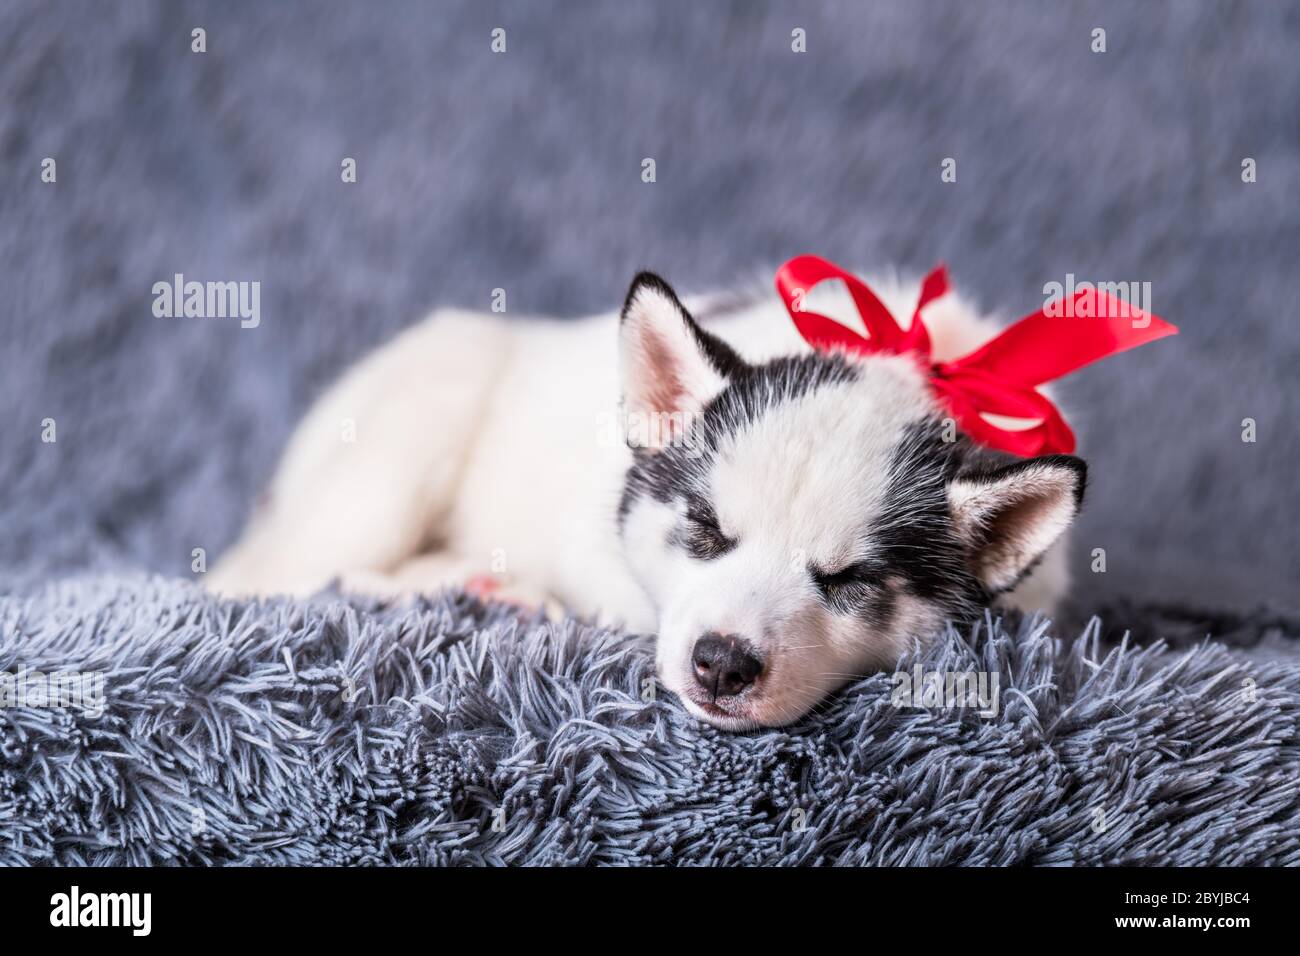 A small white dog puppy breed siberian husky with red bow sleep on grey carpet. Perfect birthday present for your child. Dogs and pet photography Stock Photo